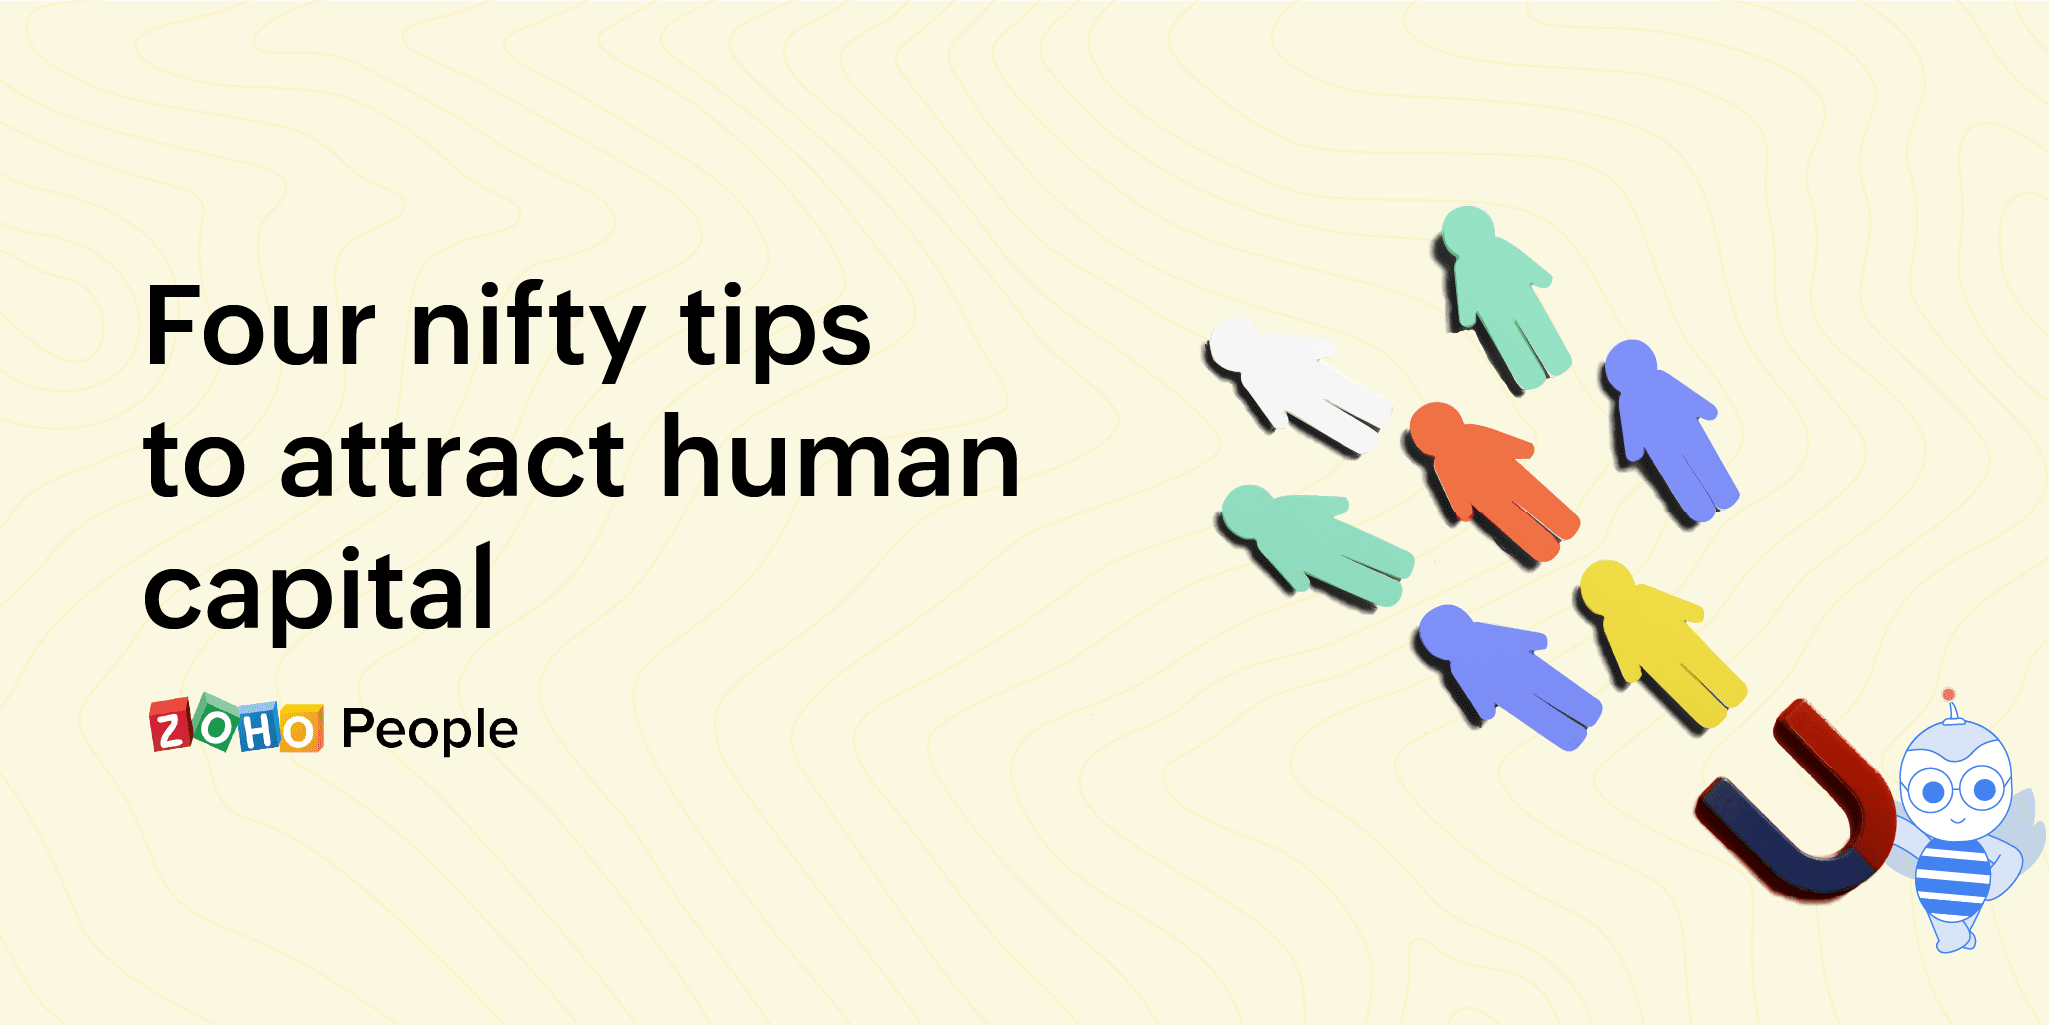 Four nifty tips to attract human capital